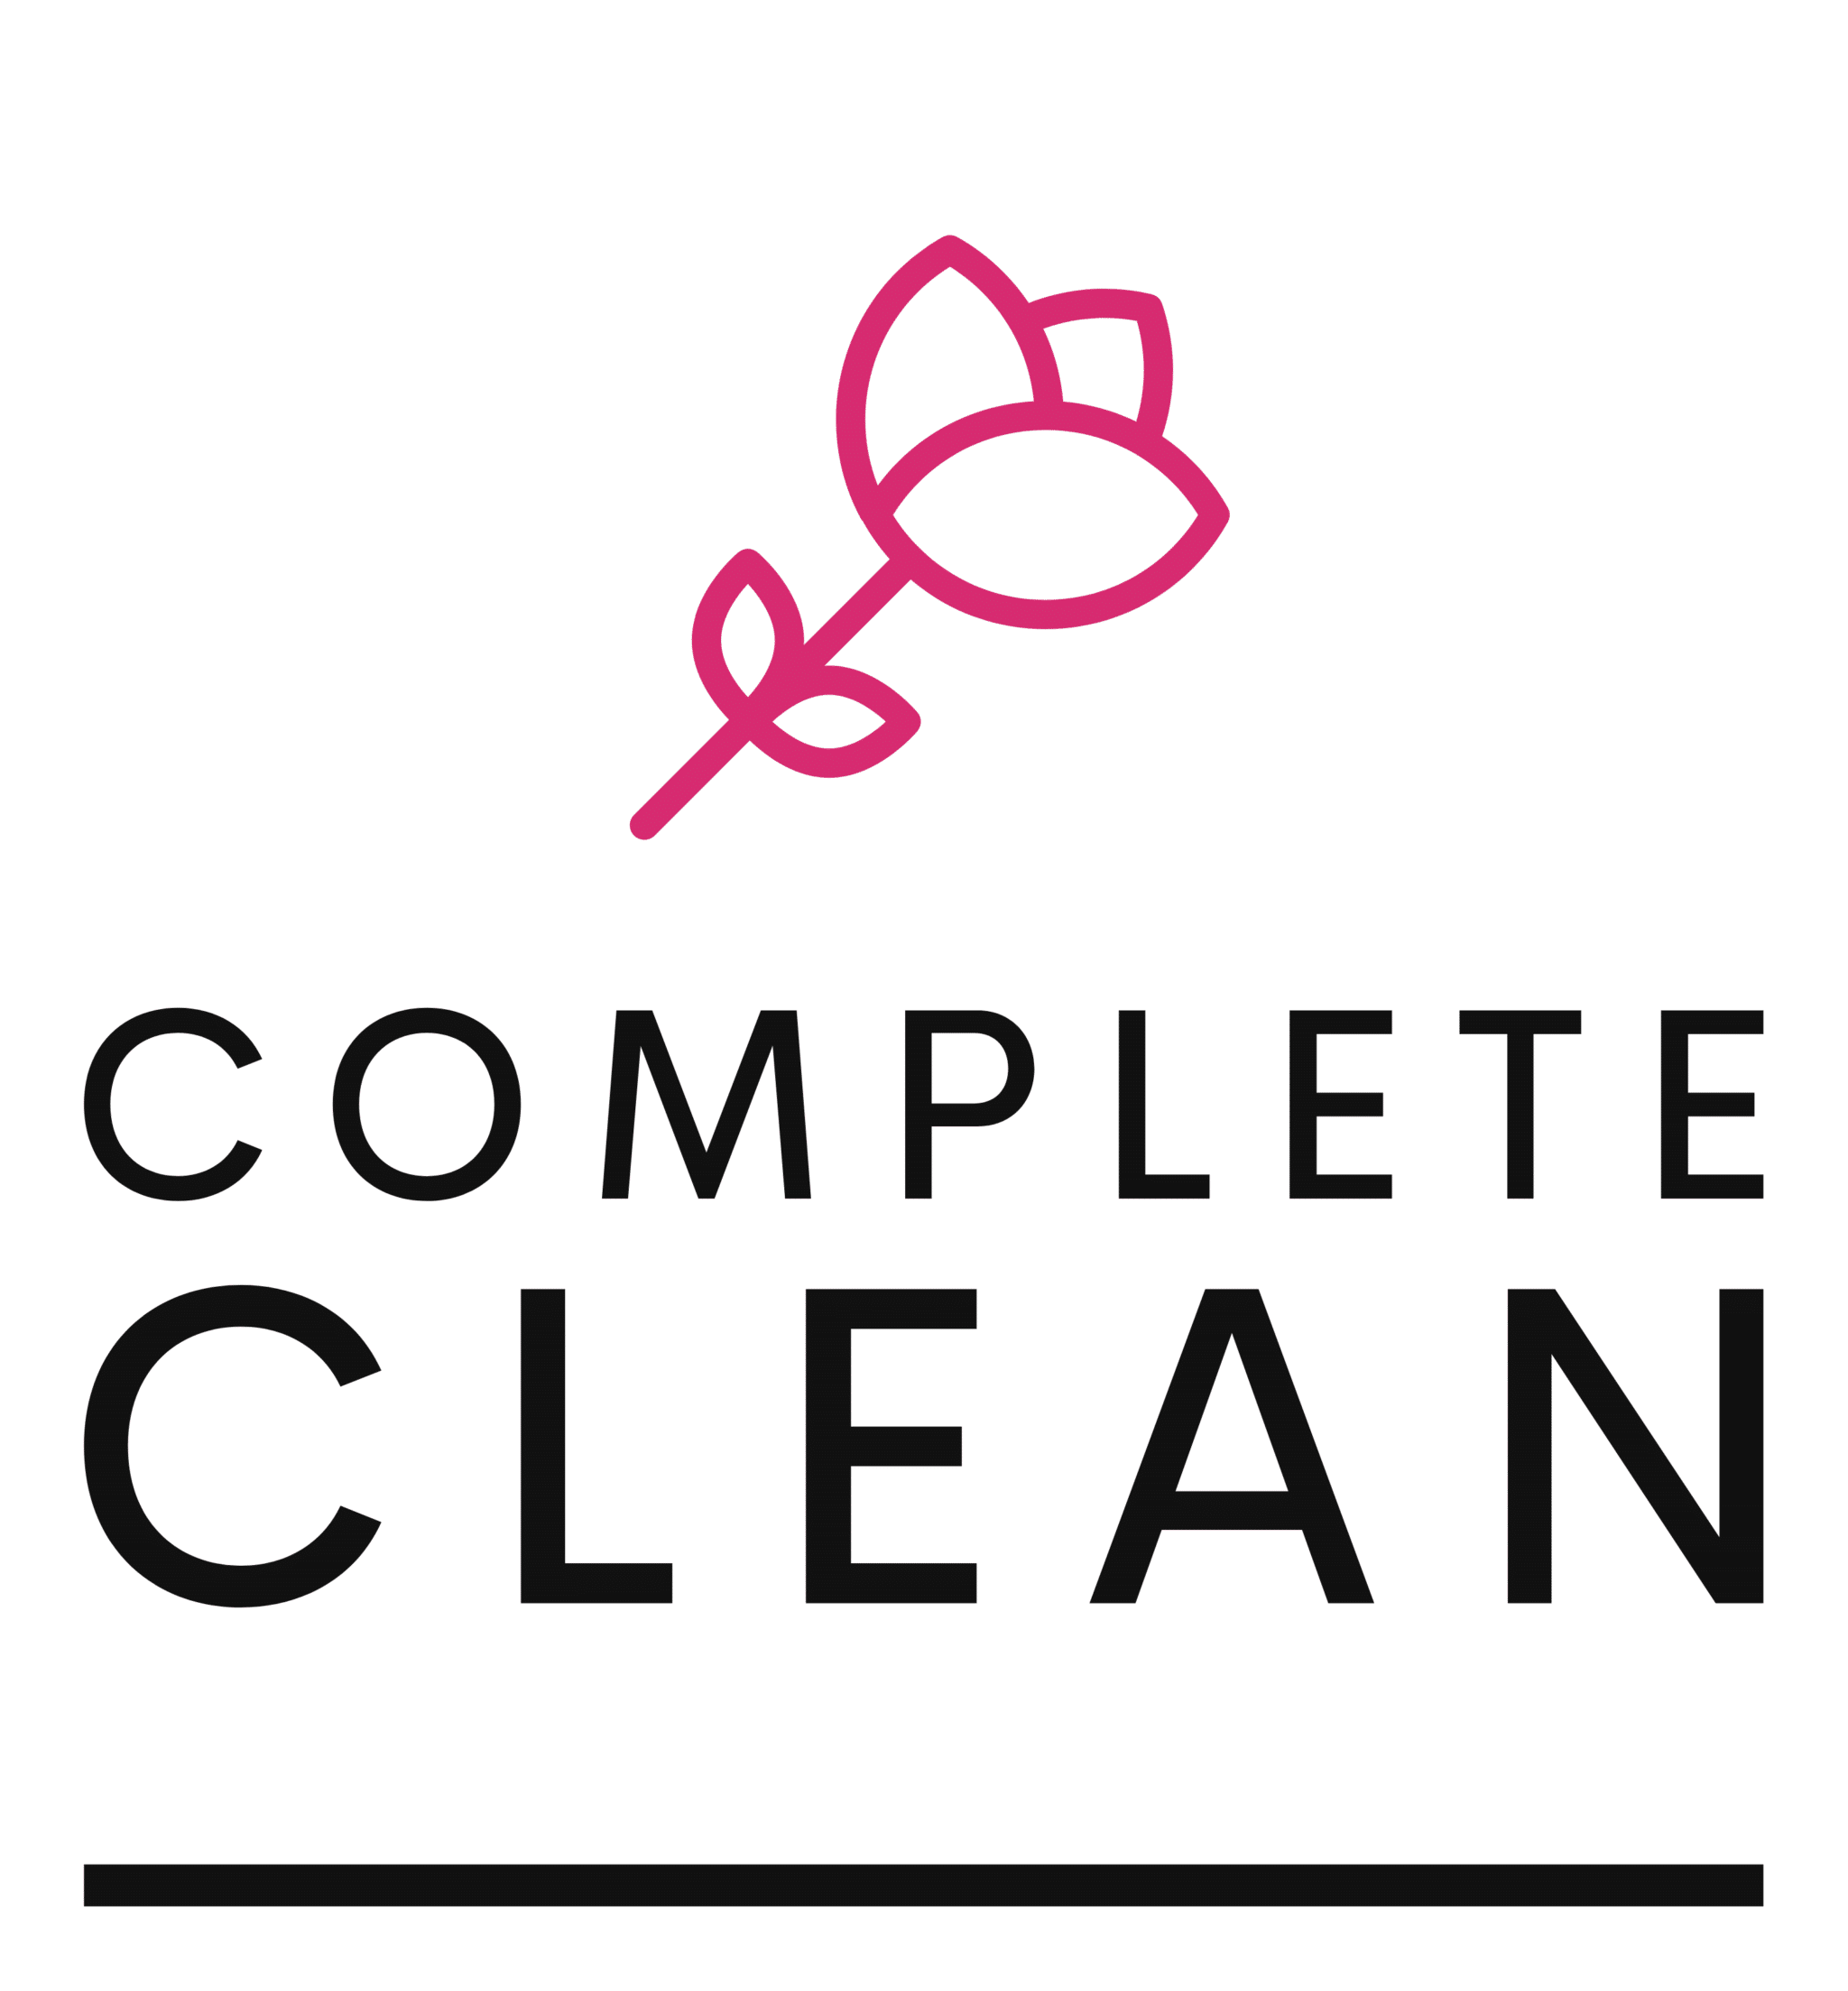 Complete Clean - Cody Holder